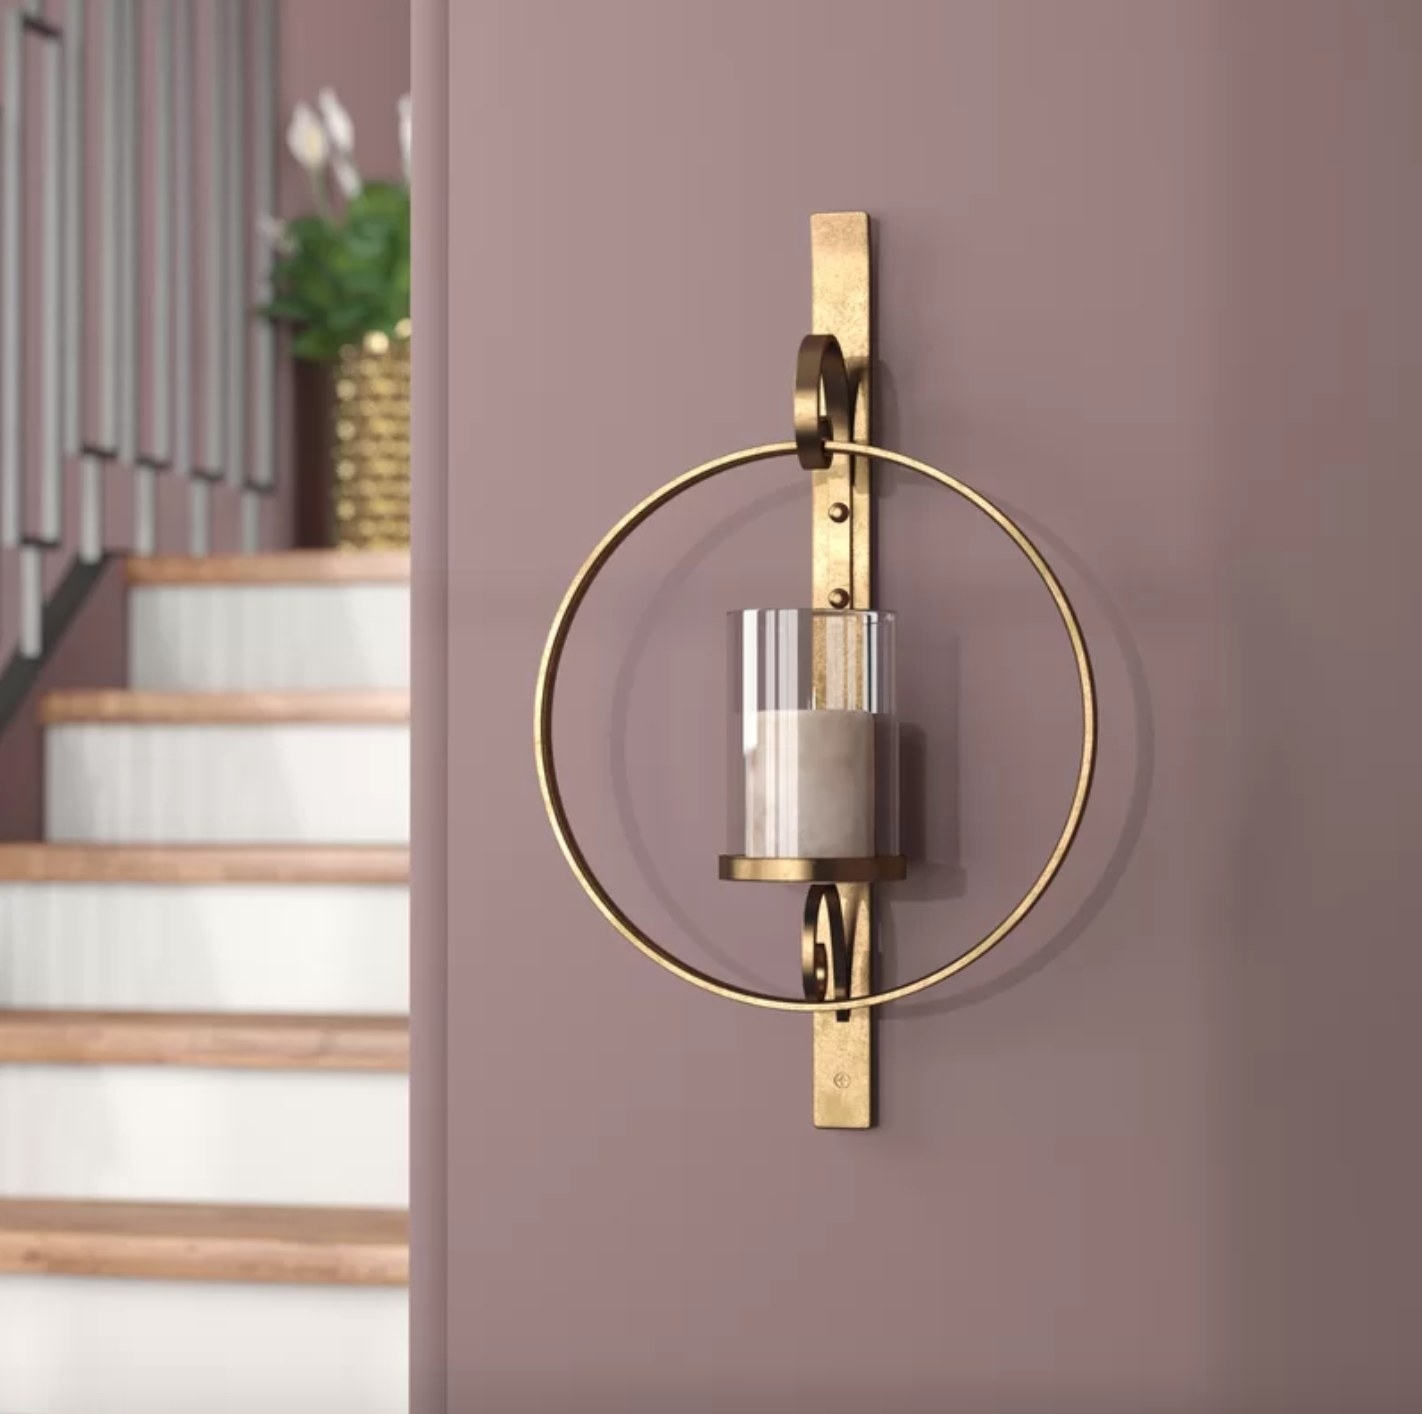 The wall sconce in gold